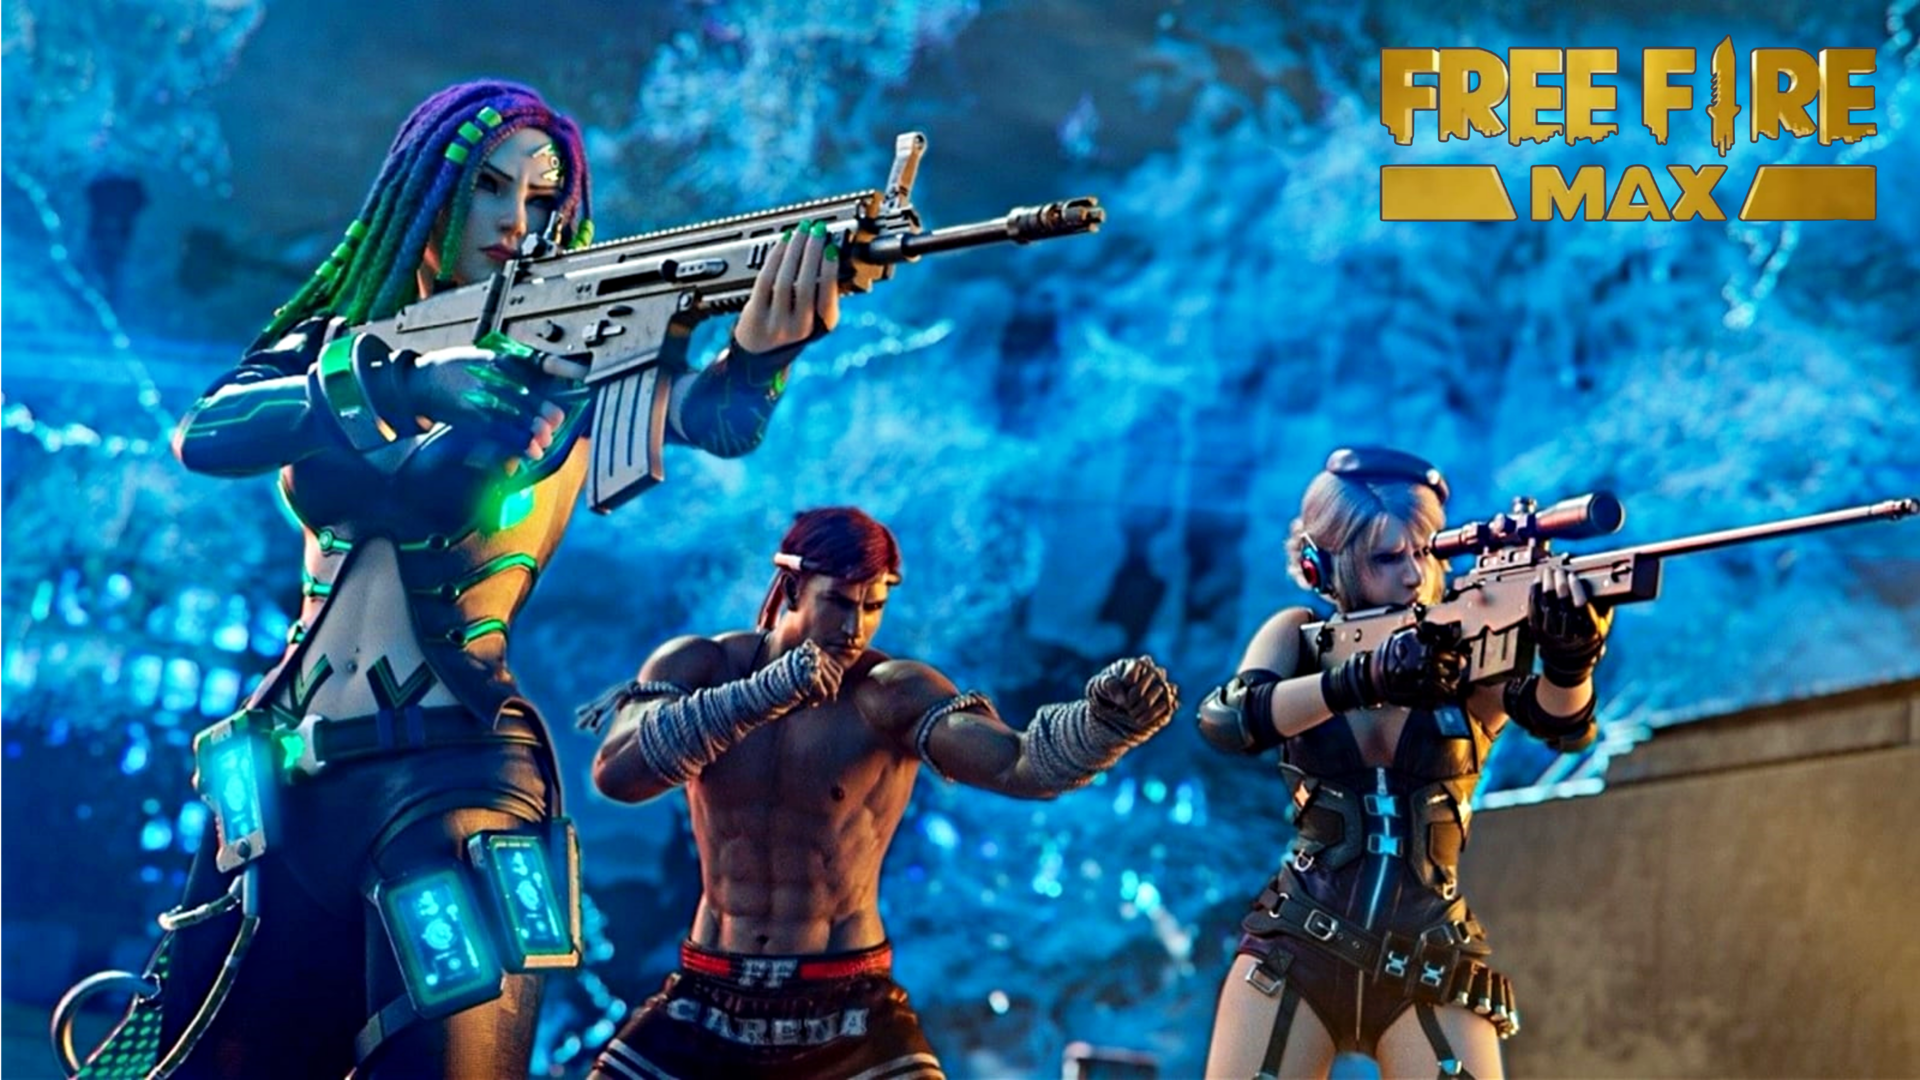 Free Fire MAX April 14 rewards: How to redeem codes